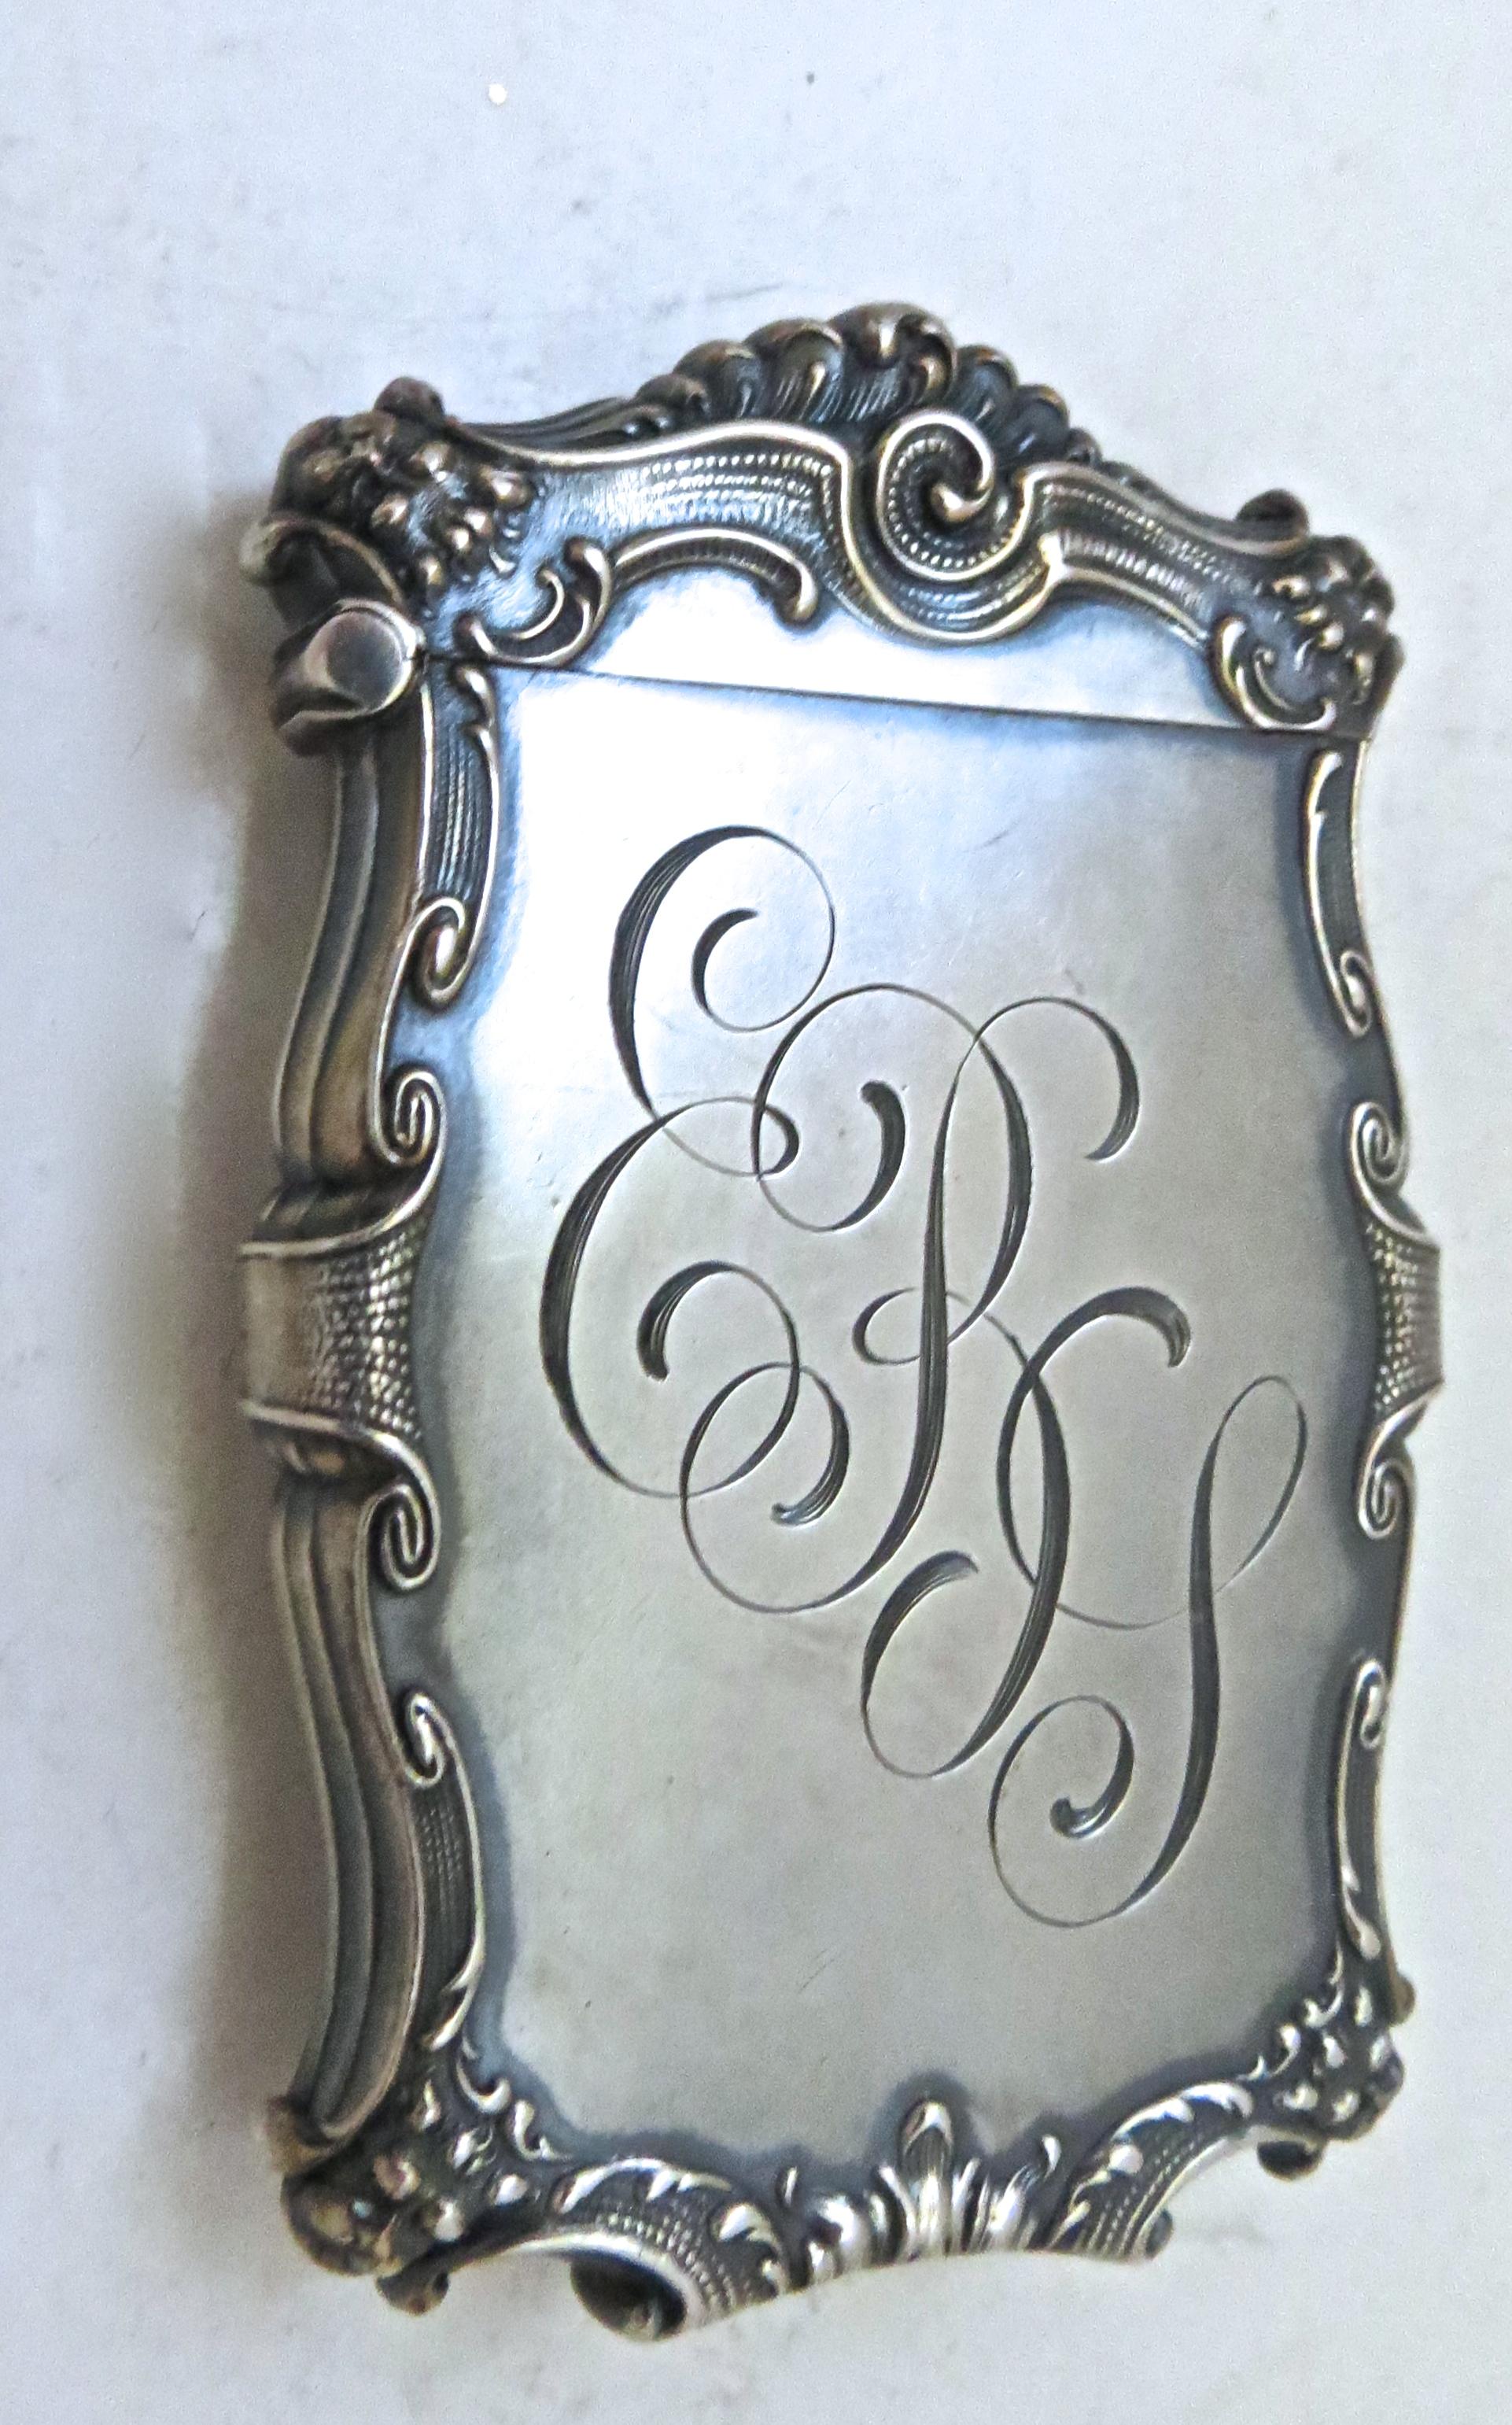 Listed is a fine quality Art Nouveau sterling silver match safe in repousse relief. It is typical of risque bar items used at the turn of the century; depicting as the central theme on one side, an attractive nude female being adored and pursued by